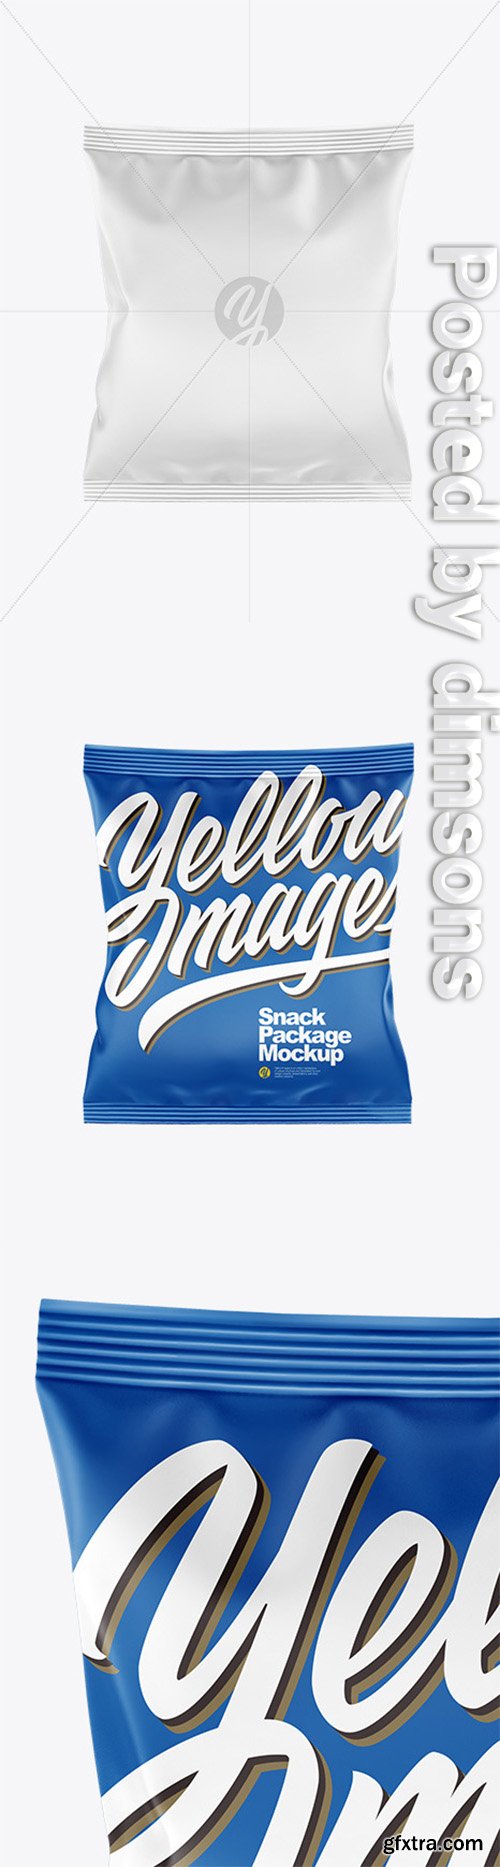 Matte Snack Mockup - Front View 52254